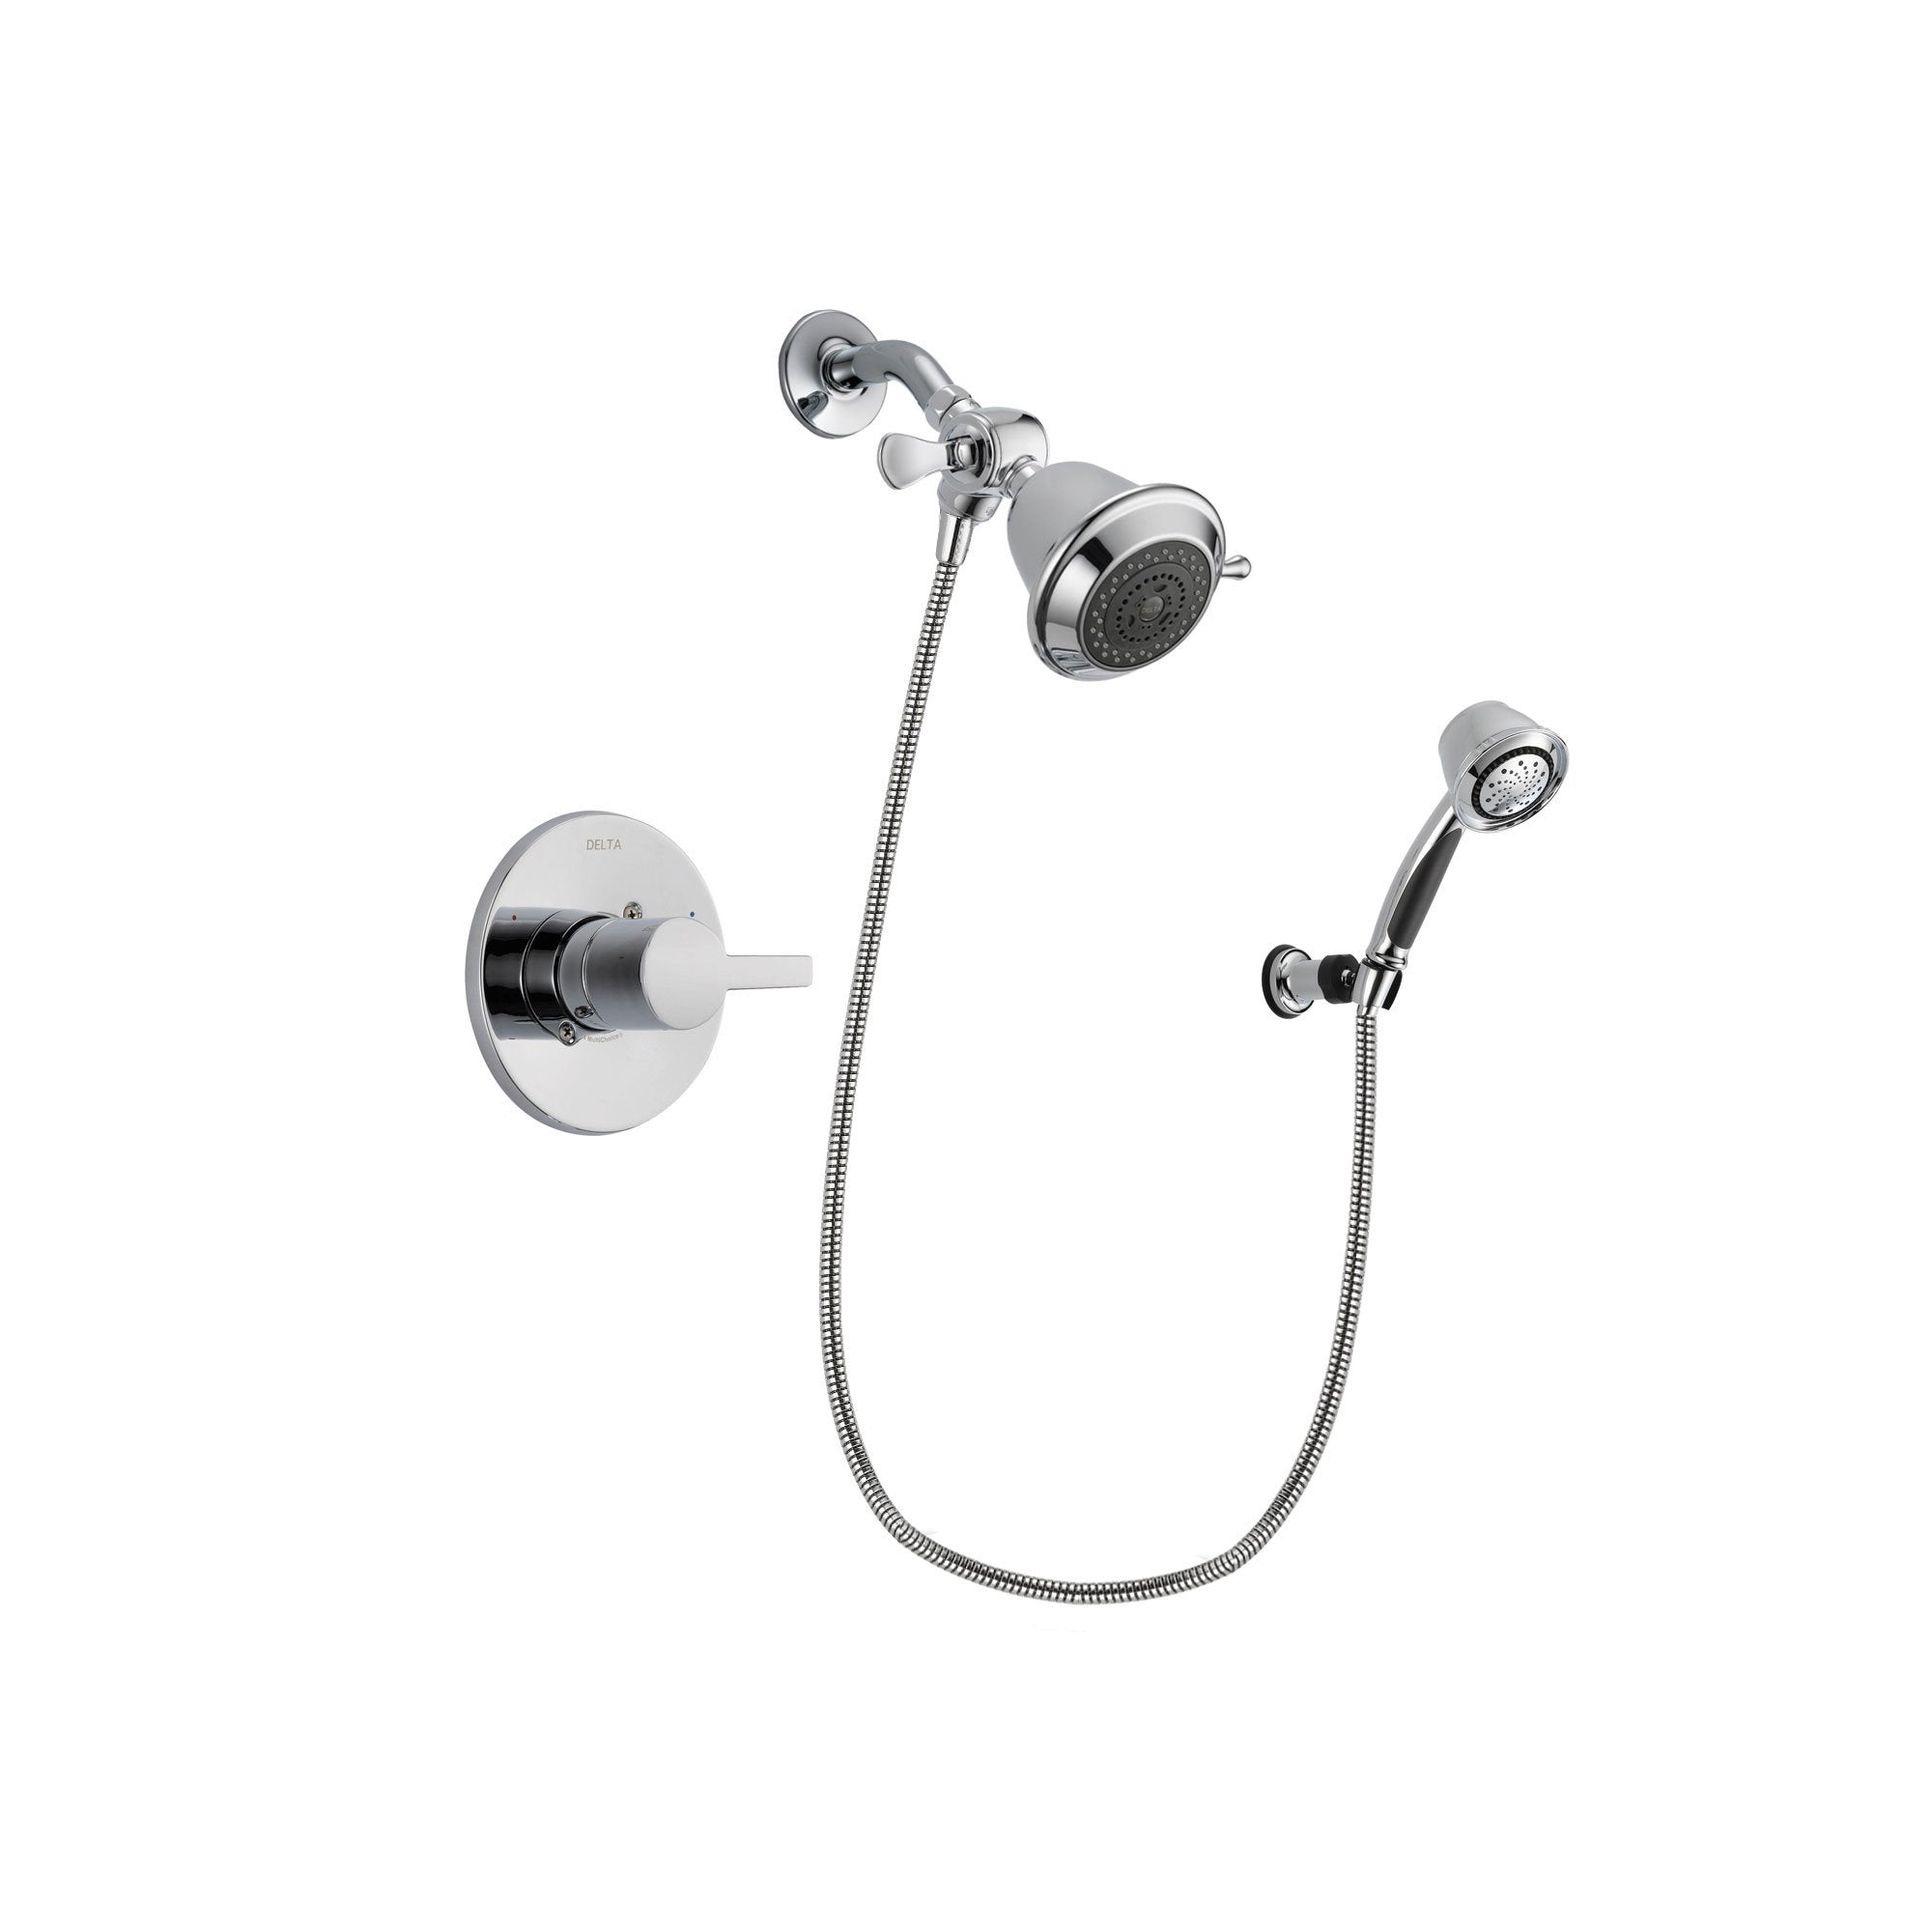 Delta Compel Chrome Shower Faucet System w/ Shower Head and Hand Shower DSP0304V